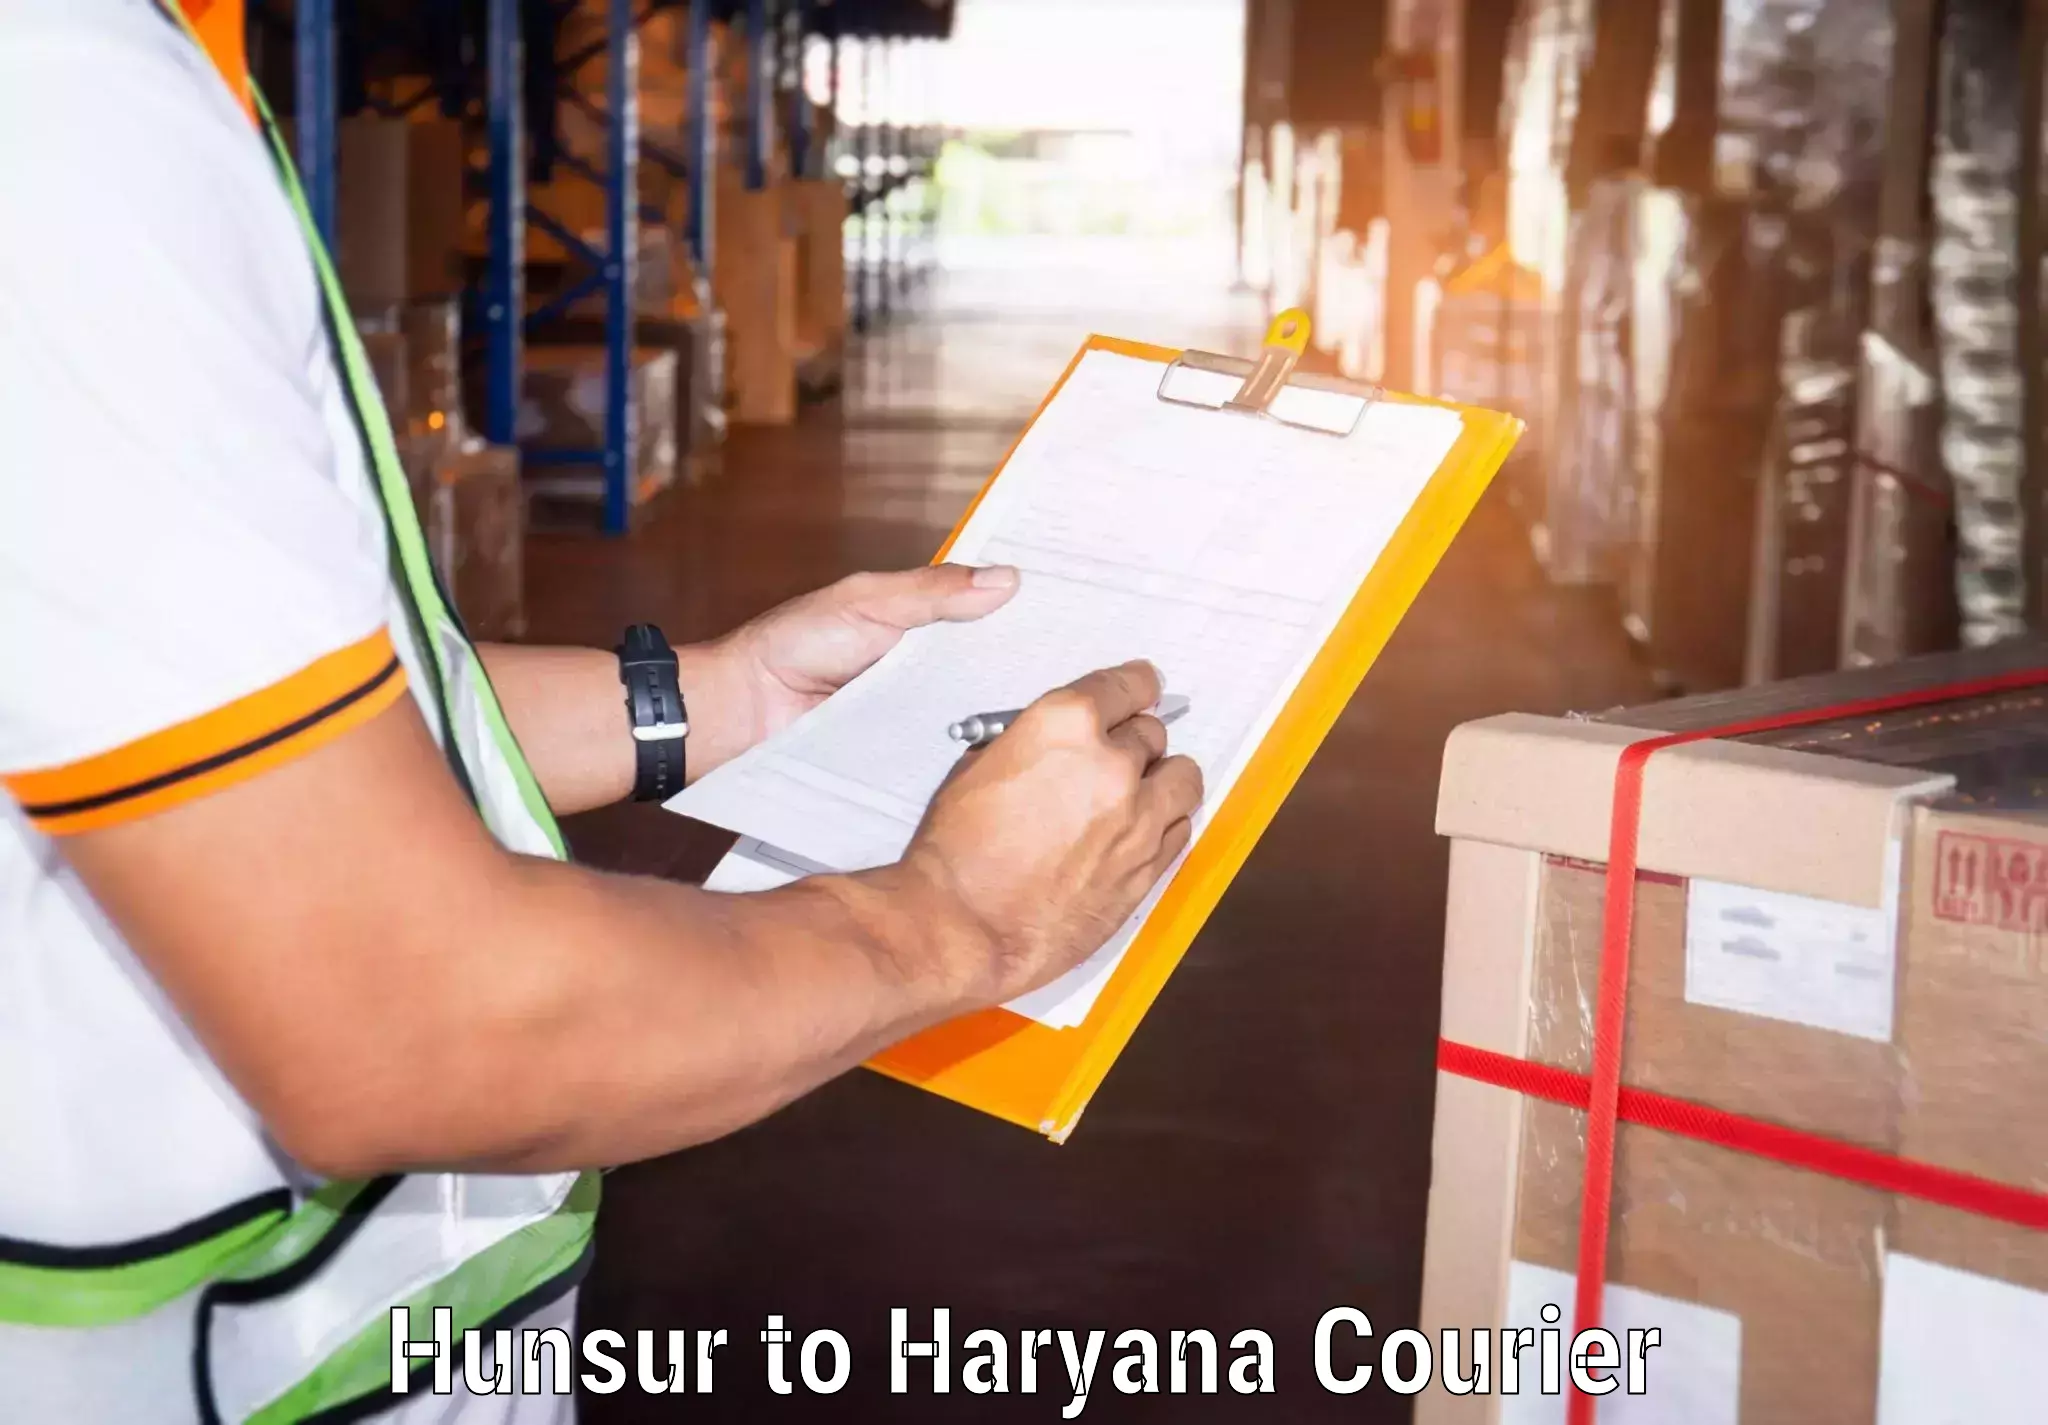 Quality courier partnerships Hunsur to Chaudhary Charan Singh Haryana Agricultural University Hisar